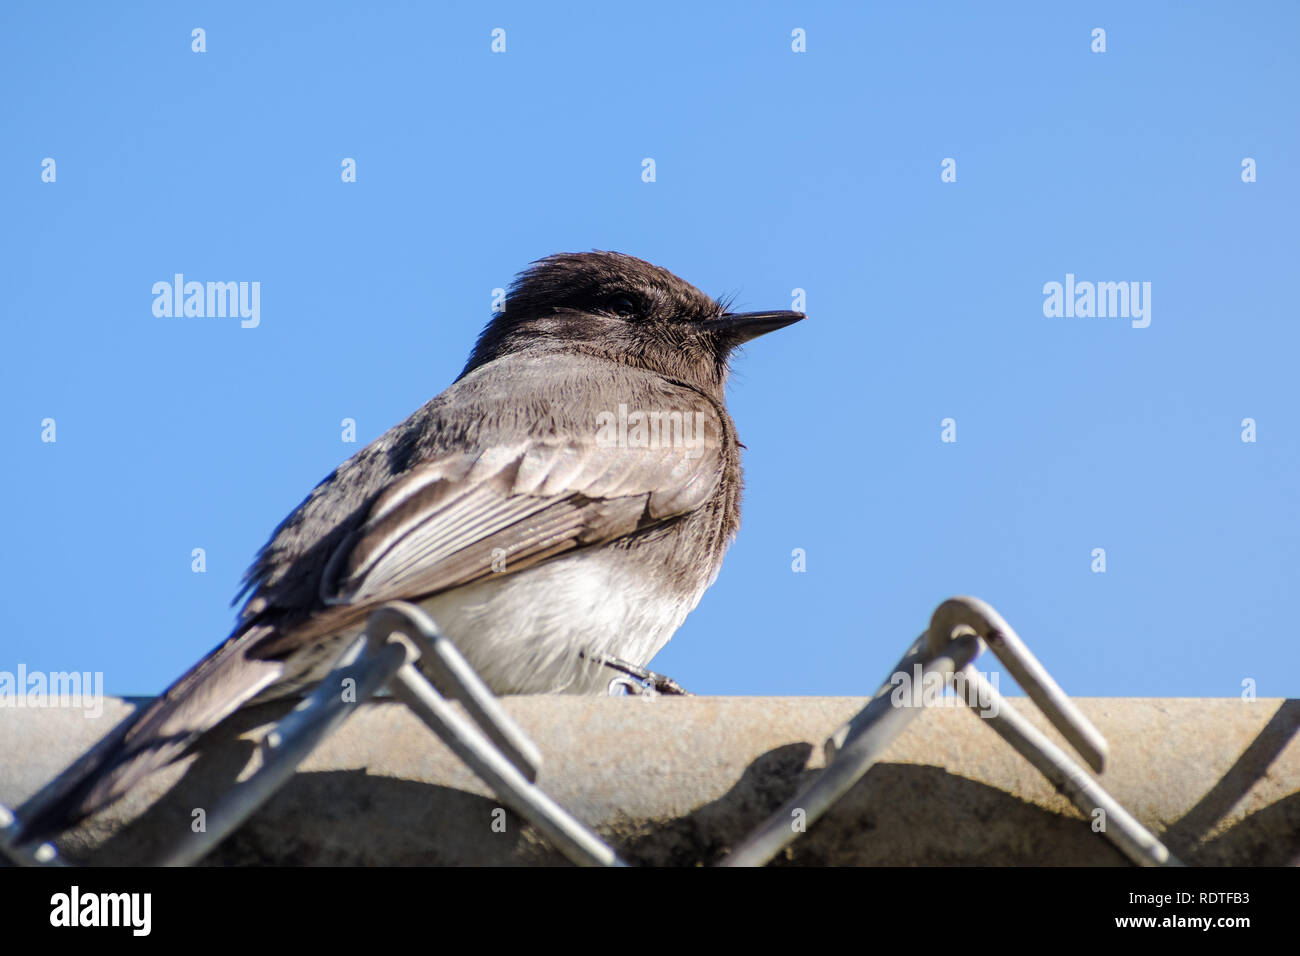 Black Phoebe sitting on a fence on a blue sky background, California Stock Photo